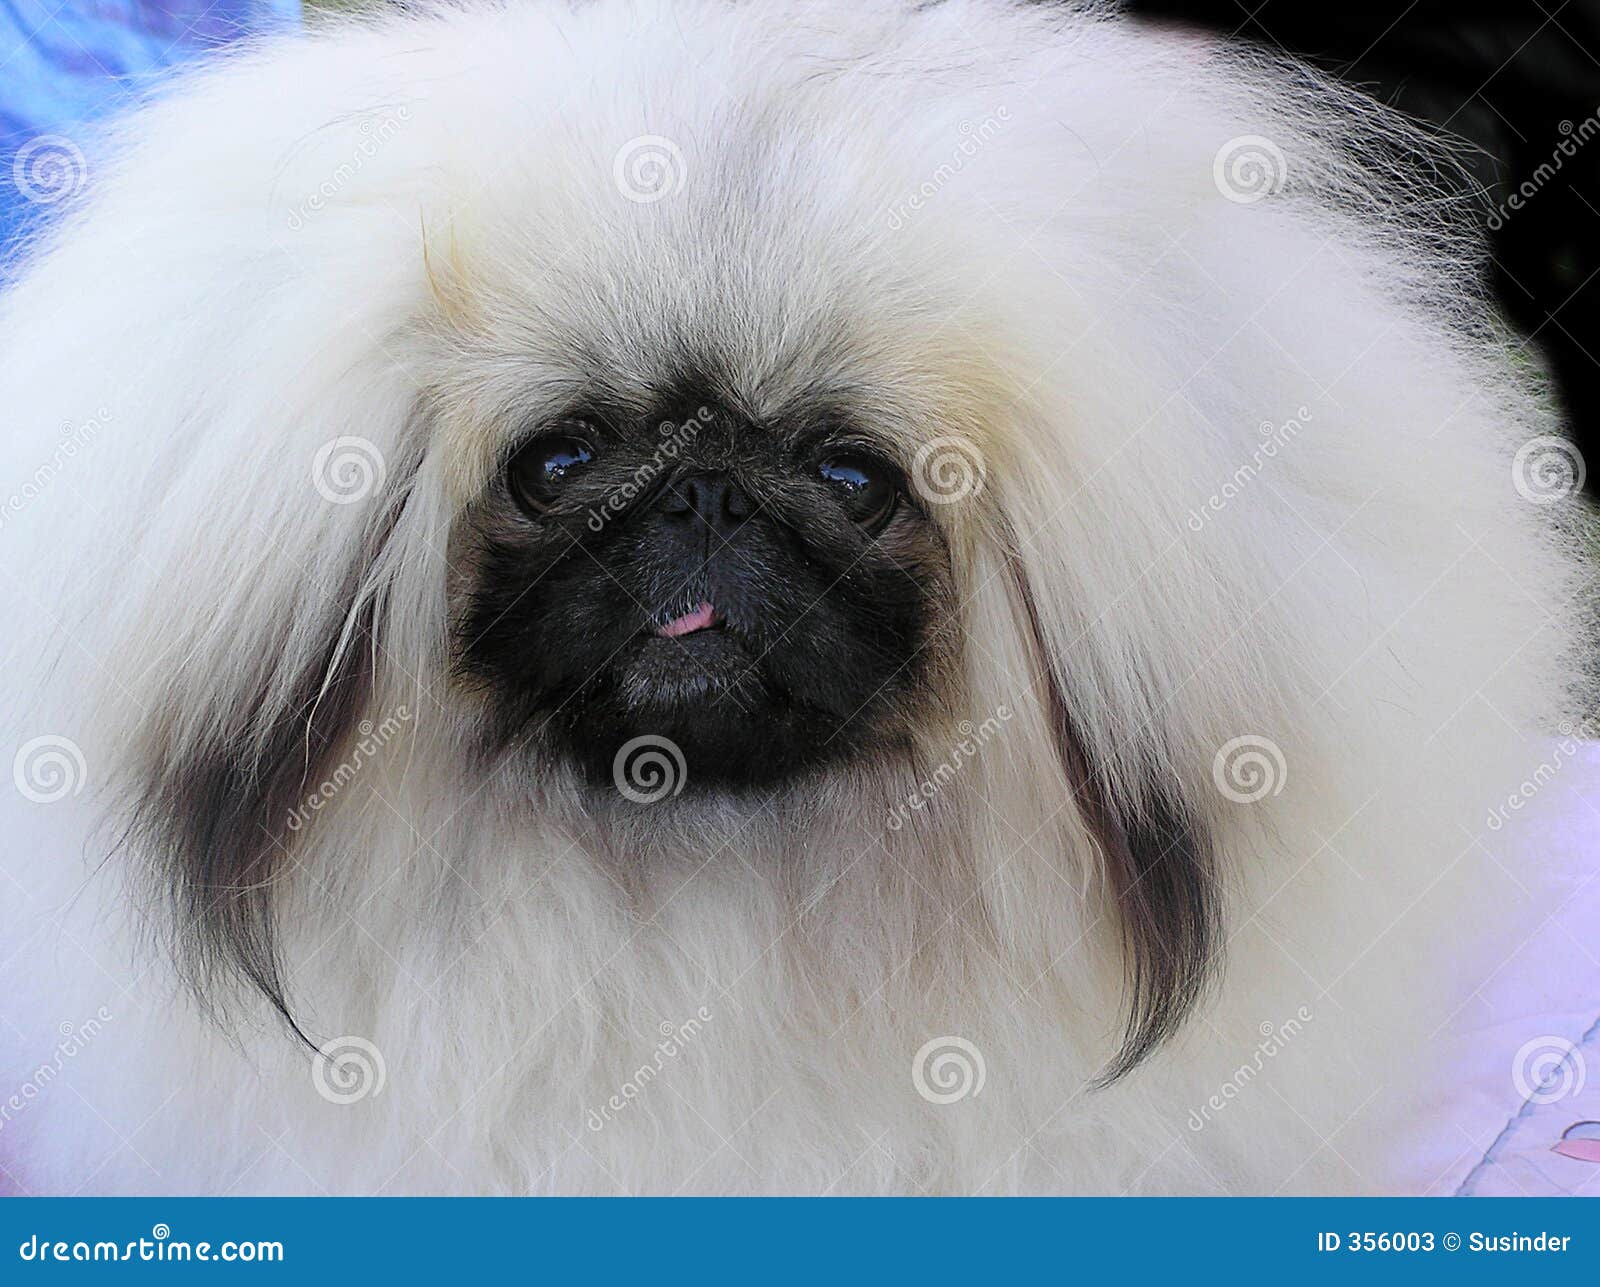 Don't know the breed ... photographed this cute dog at a dog show.